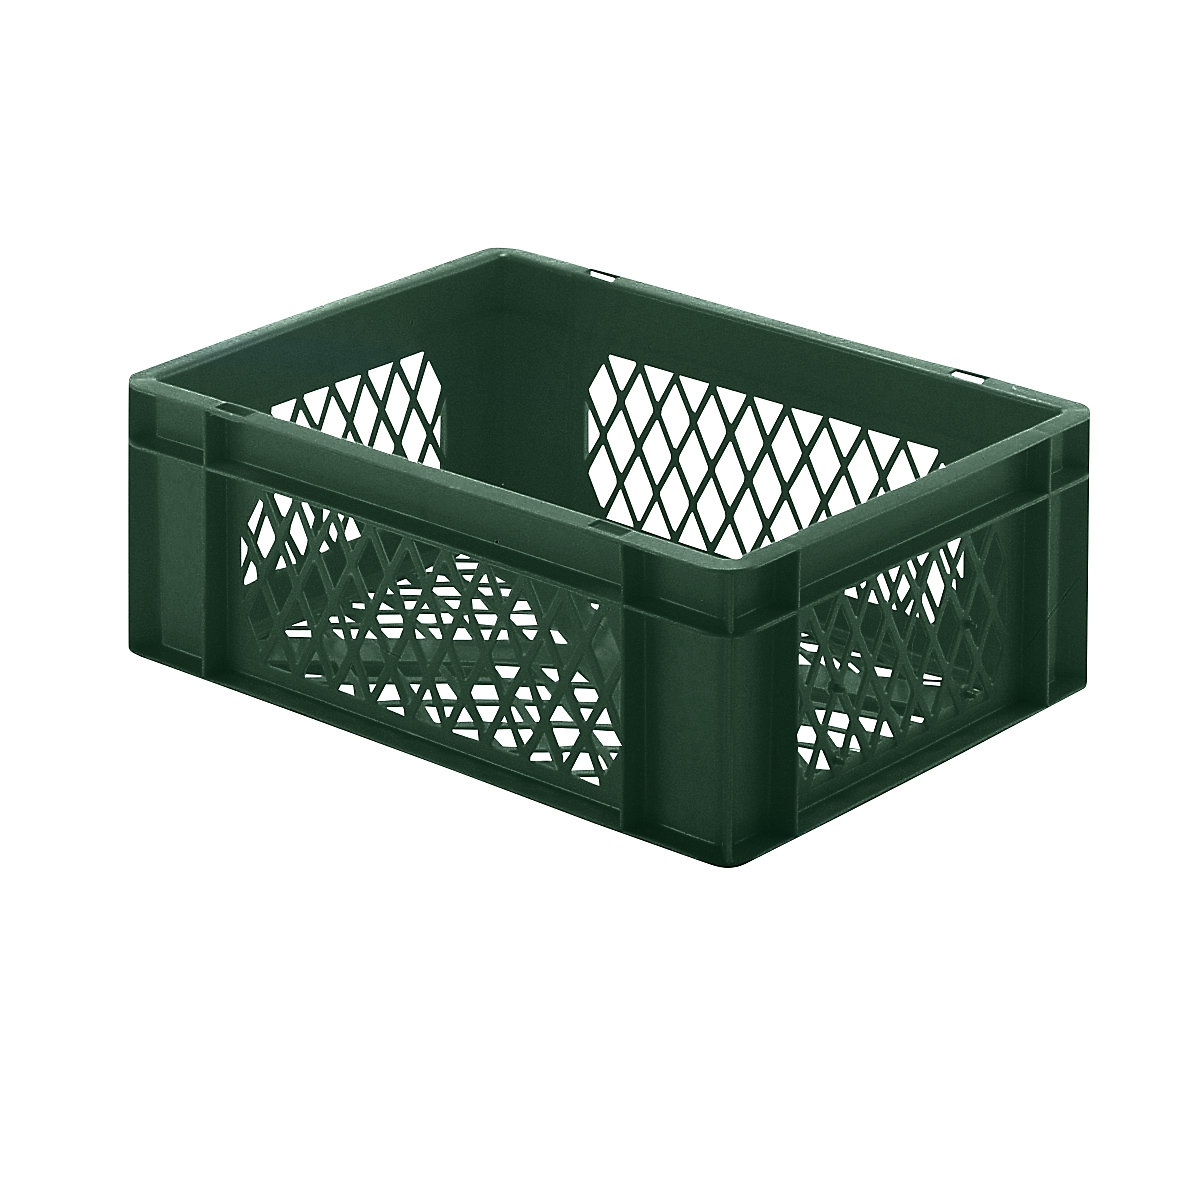 Euro stacking container, perforated walls and base, LxWxH 400 x 300 x 145 mm, green, pack of 5